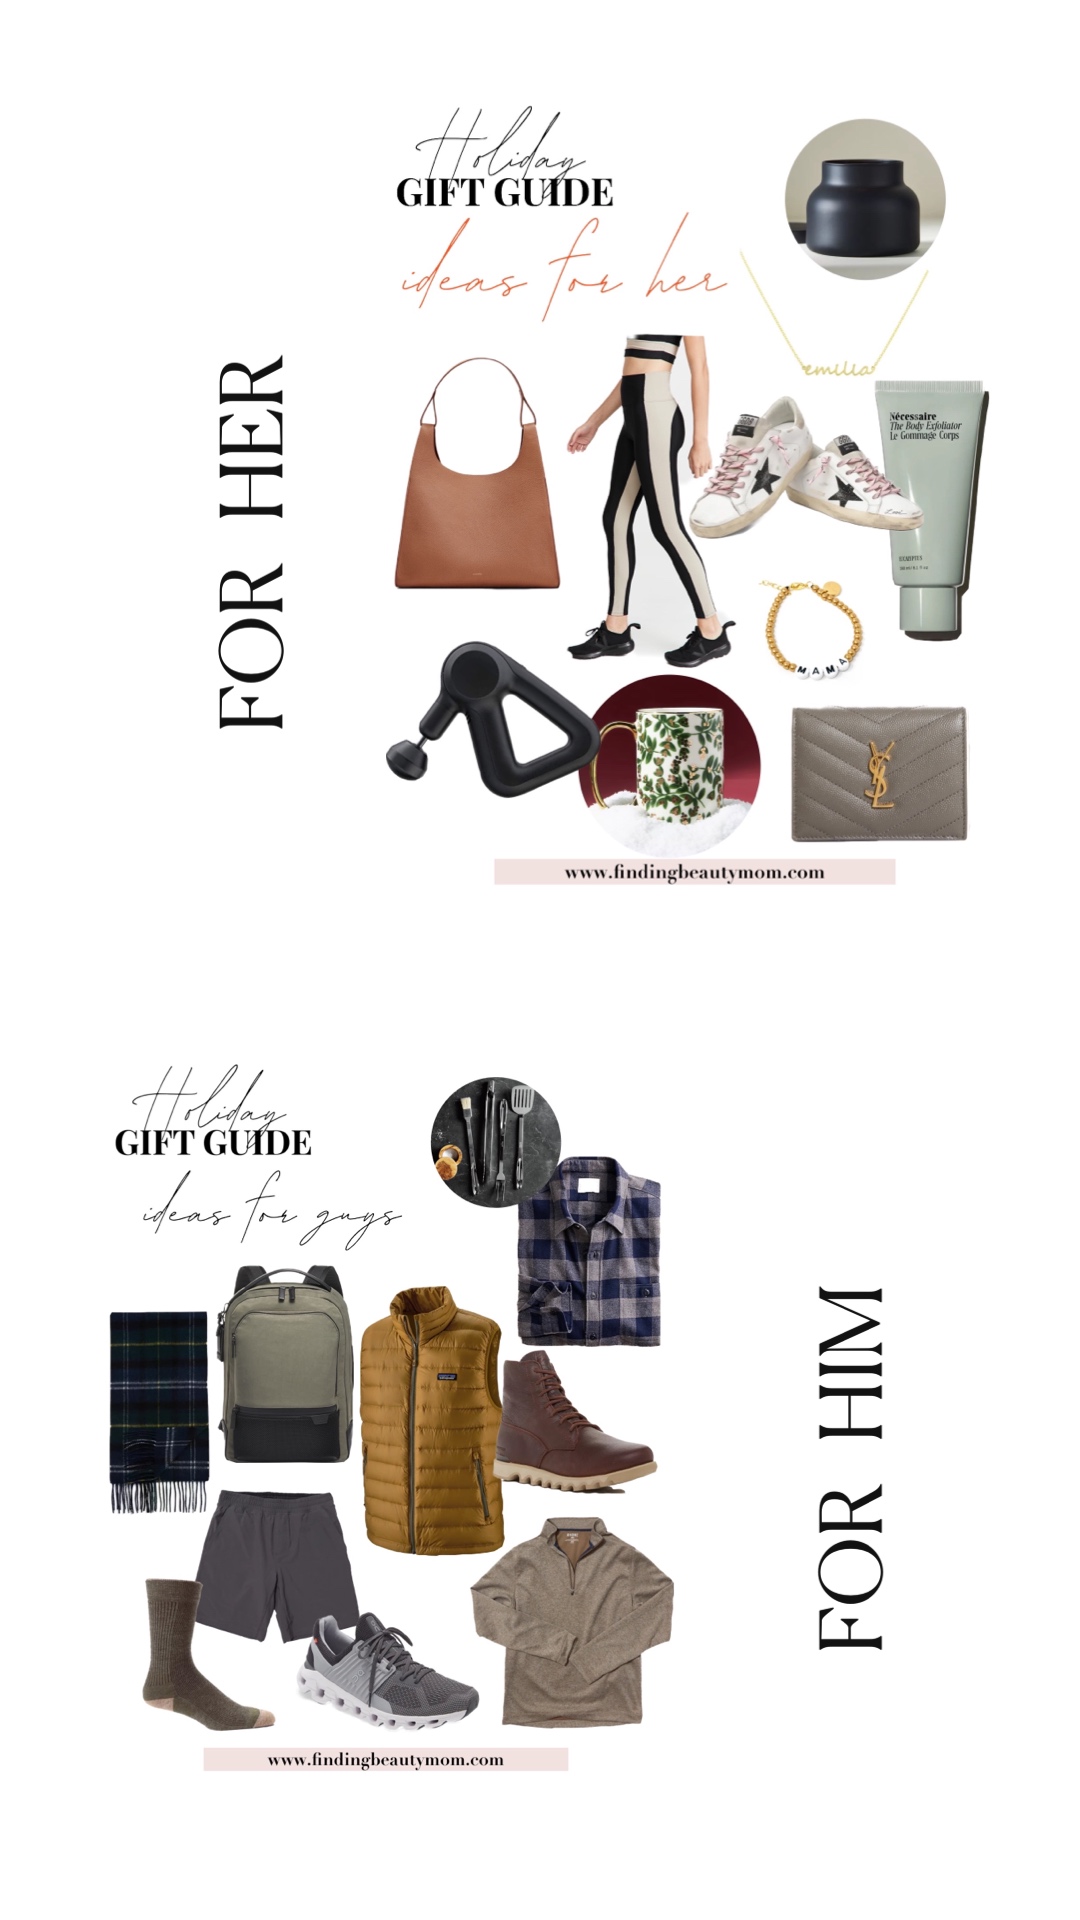 his and her, him and her gift guides, holiday gift guide. his and hers gift guides, gifts for her, wife gifts, mom gifts, gifts for her that she''l love